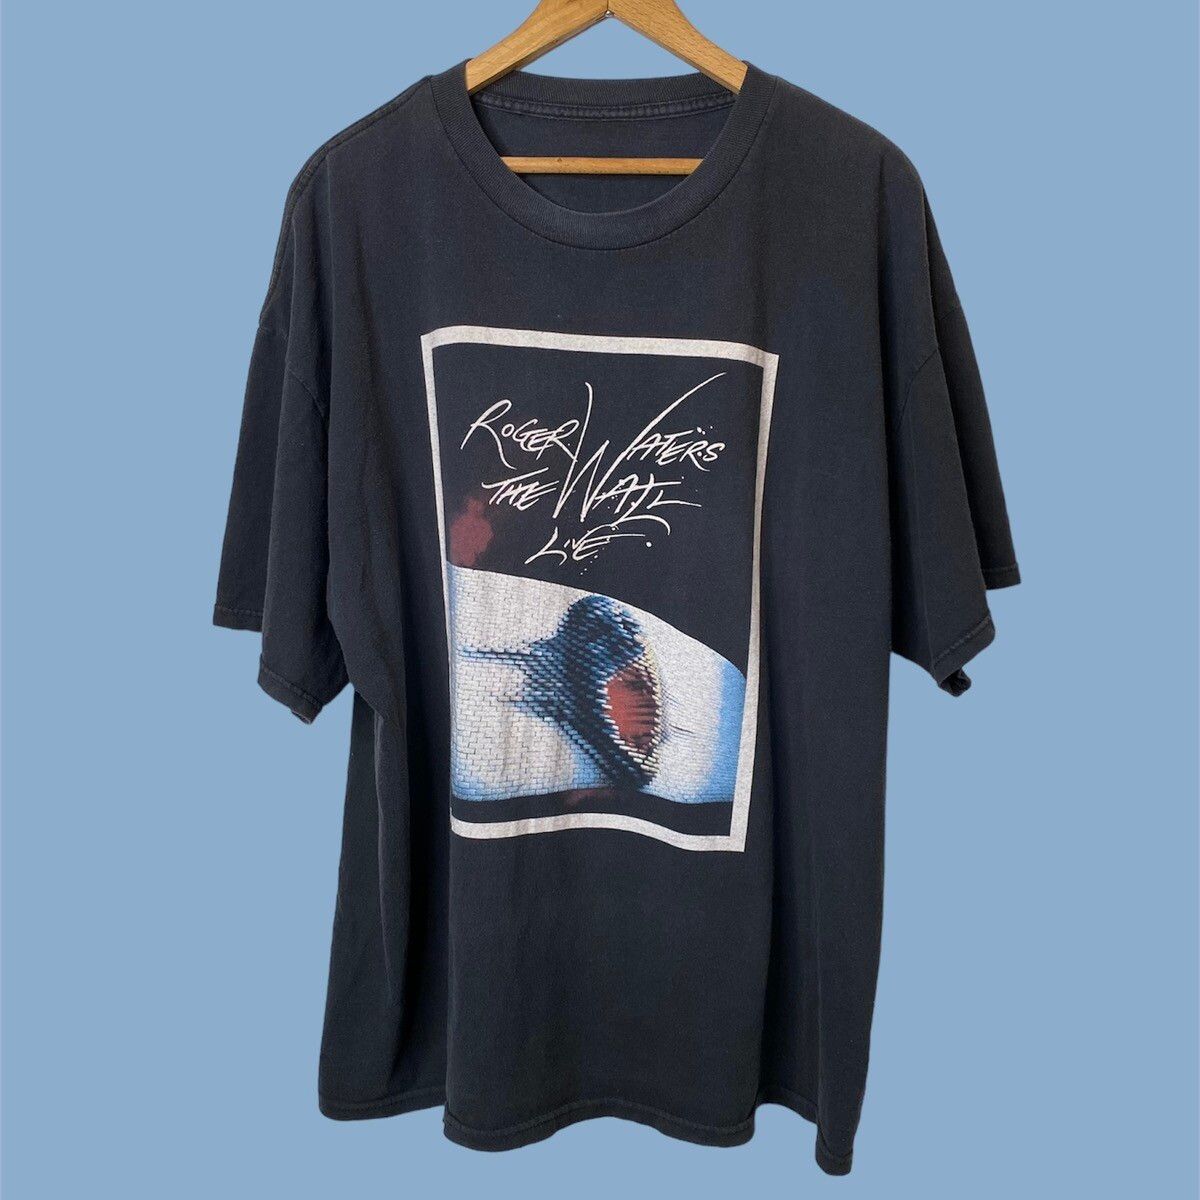 Pink Floyd Vintage Pink Floyd The Wall 2010 T Shirt Size XL Size US XL / EU 56 / 4 - 1 Preview